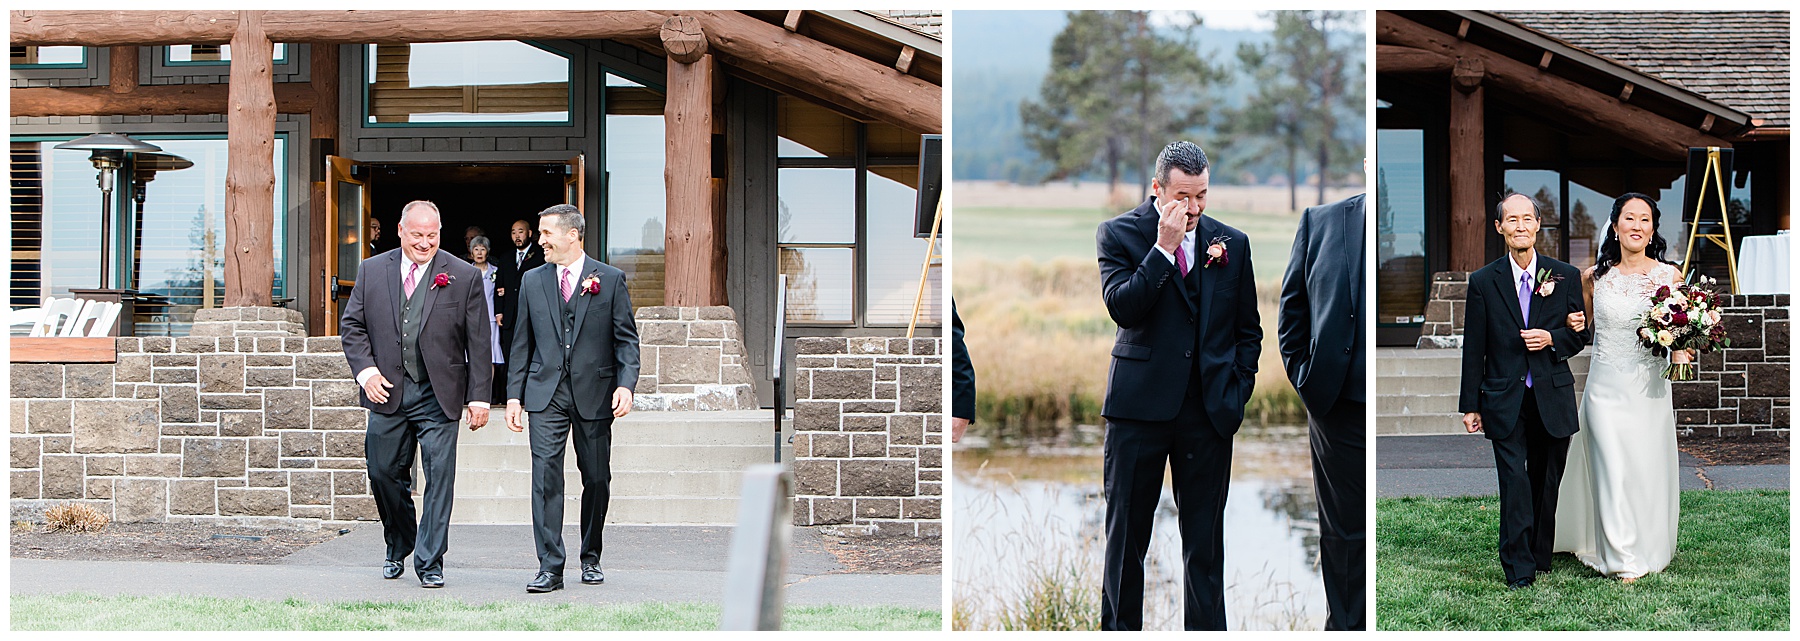 The groom walking to the ceremony, the bride is walked down the aisle by her father as the groom wipes a tear away.